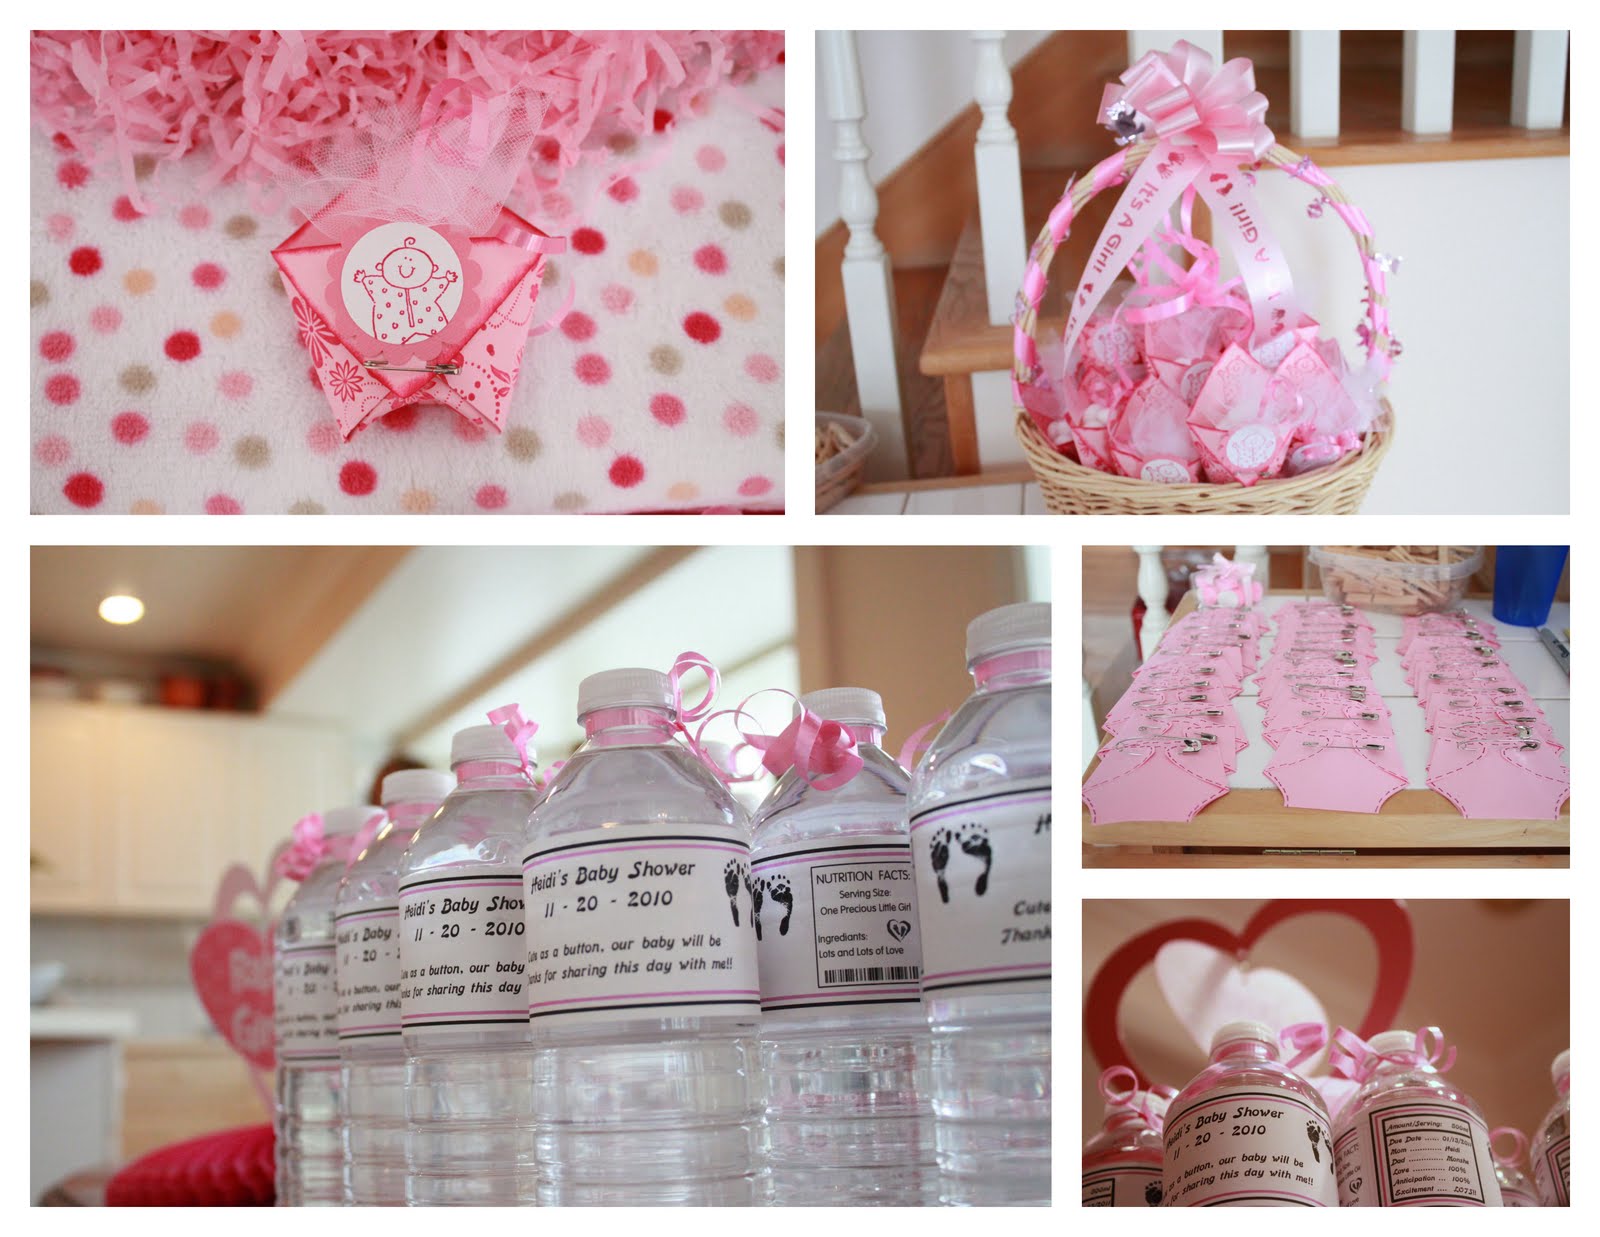  paper flowers along with pink and white candies that adorned the room title=